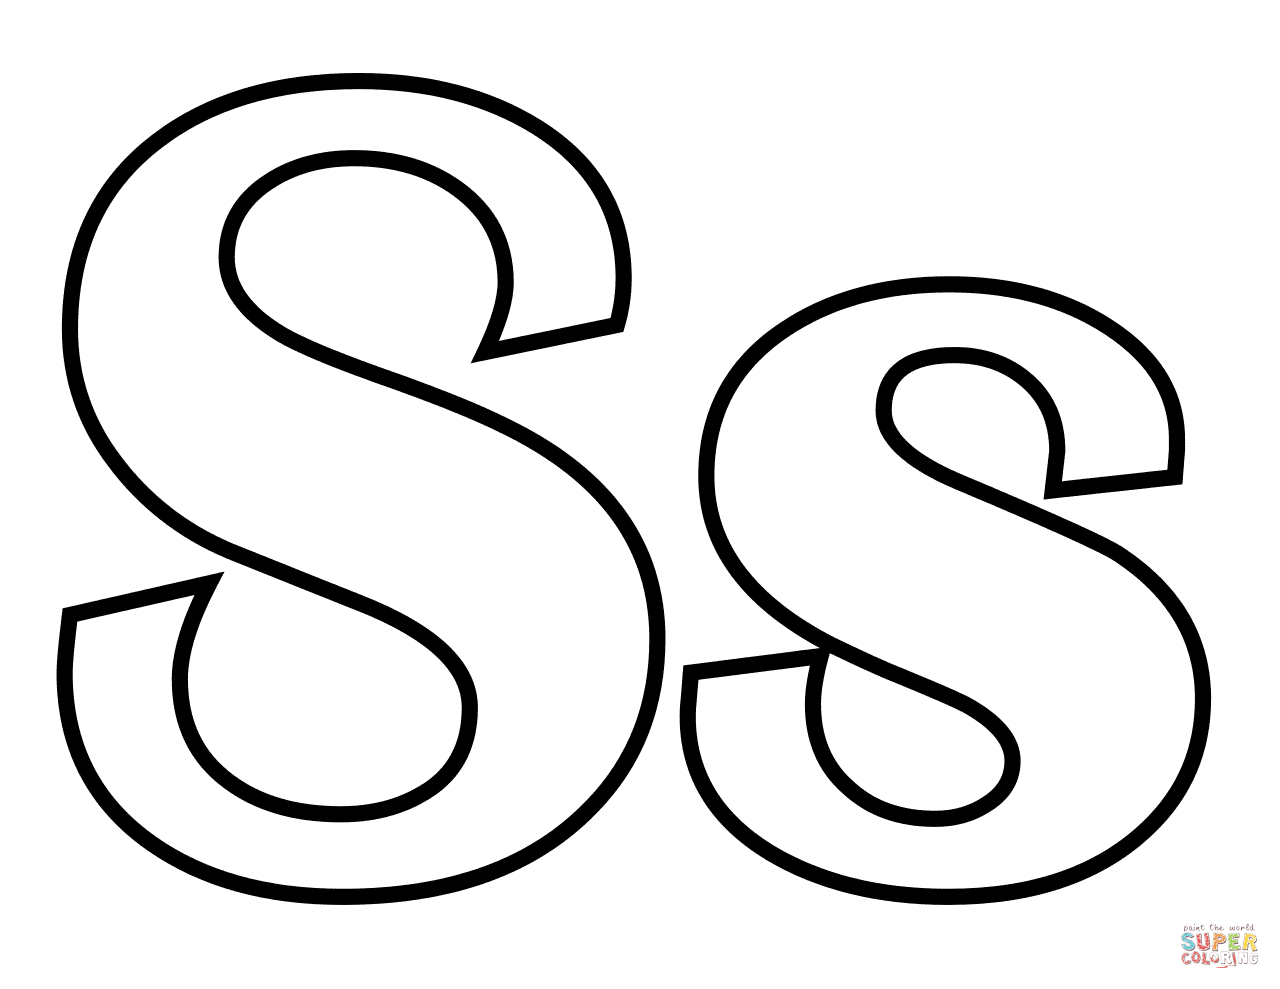 Classic letter s coloring page free printable coloring pages alphabet coloring pages alphabet coloring printable alphabet letters